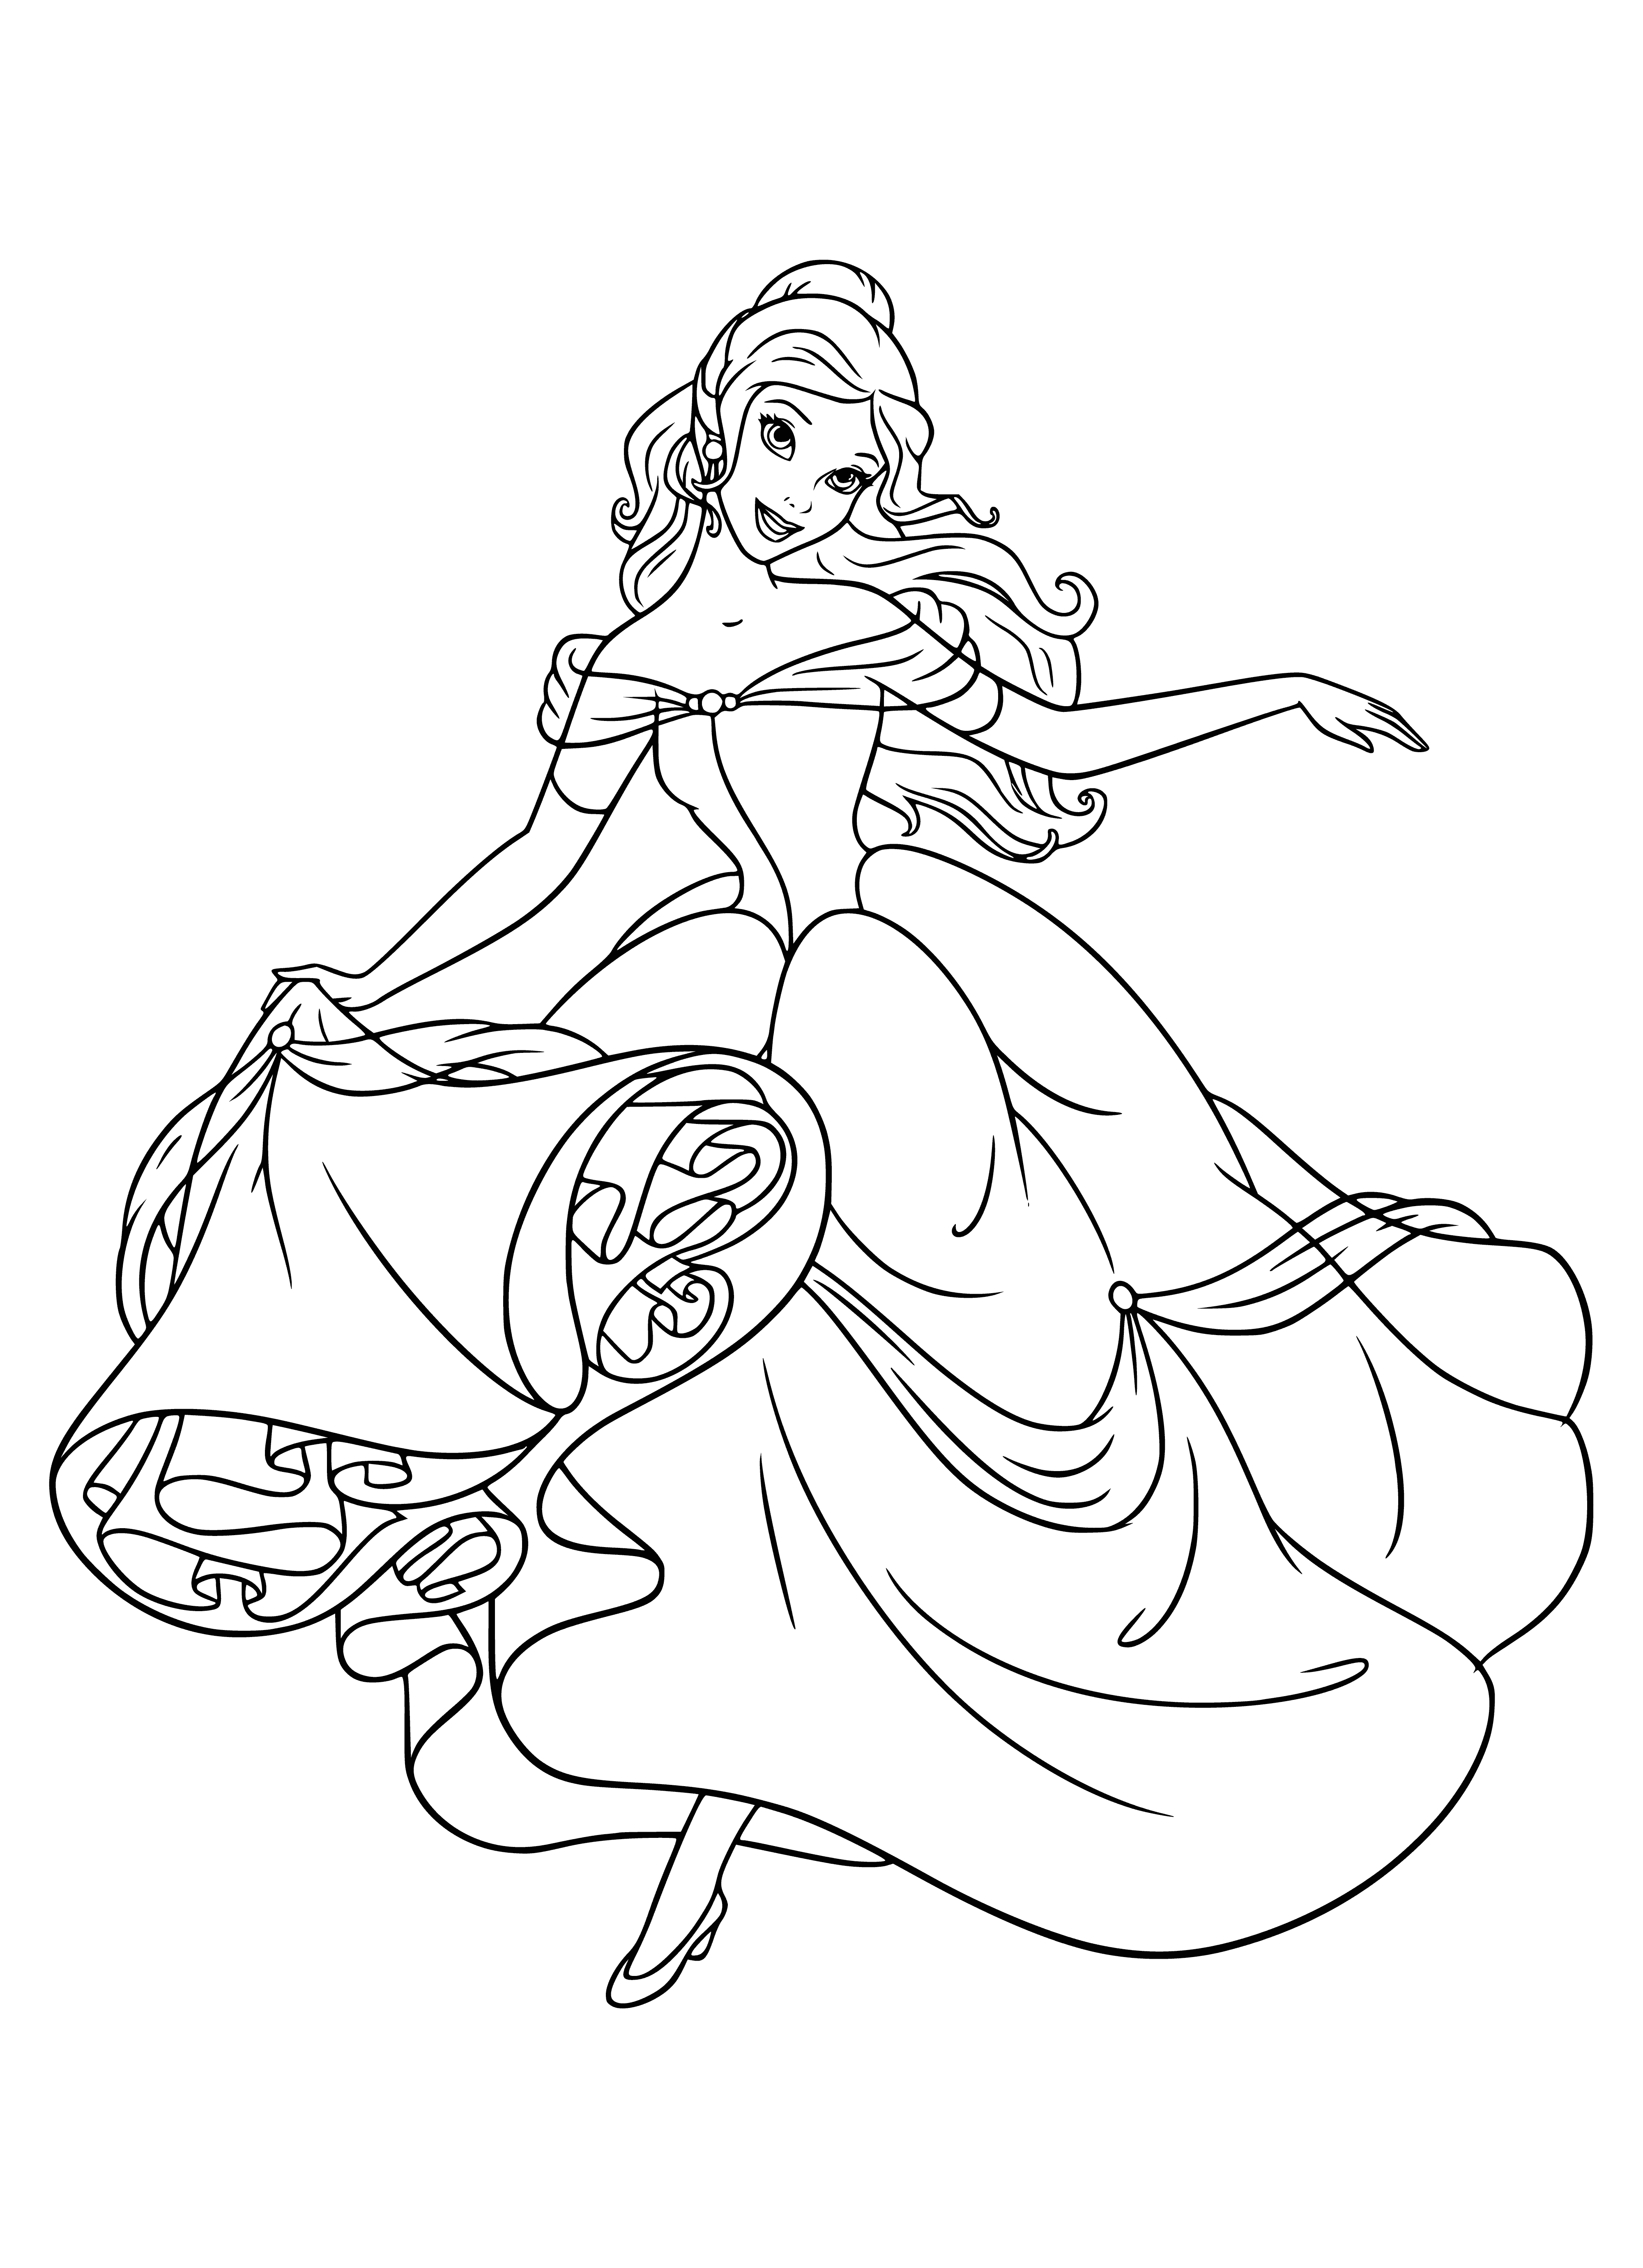 coloring page: Belle stands in front of a mysterious door, wearing a yellow dress and red rose, determined to enter.